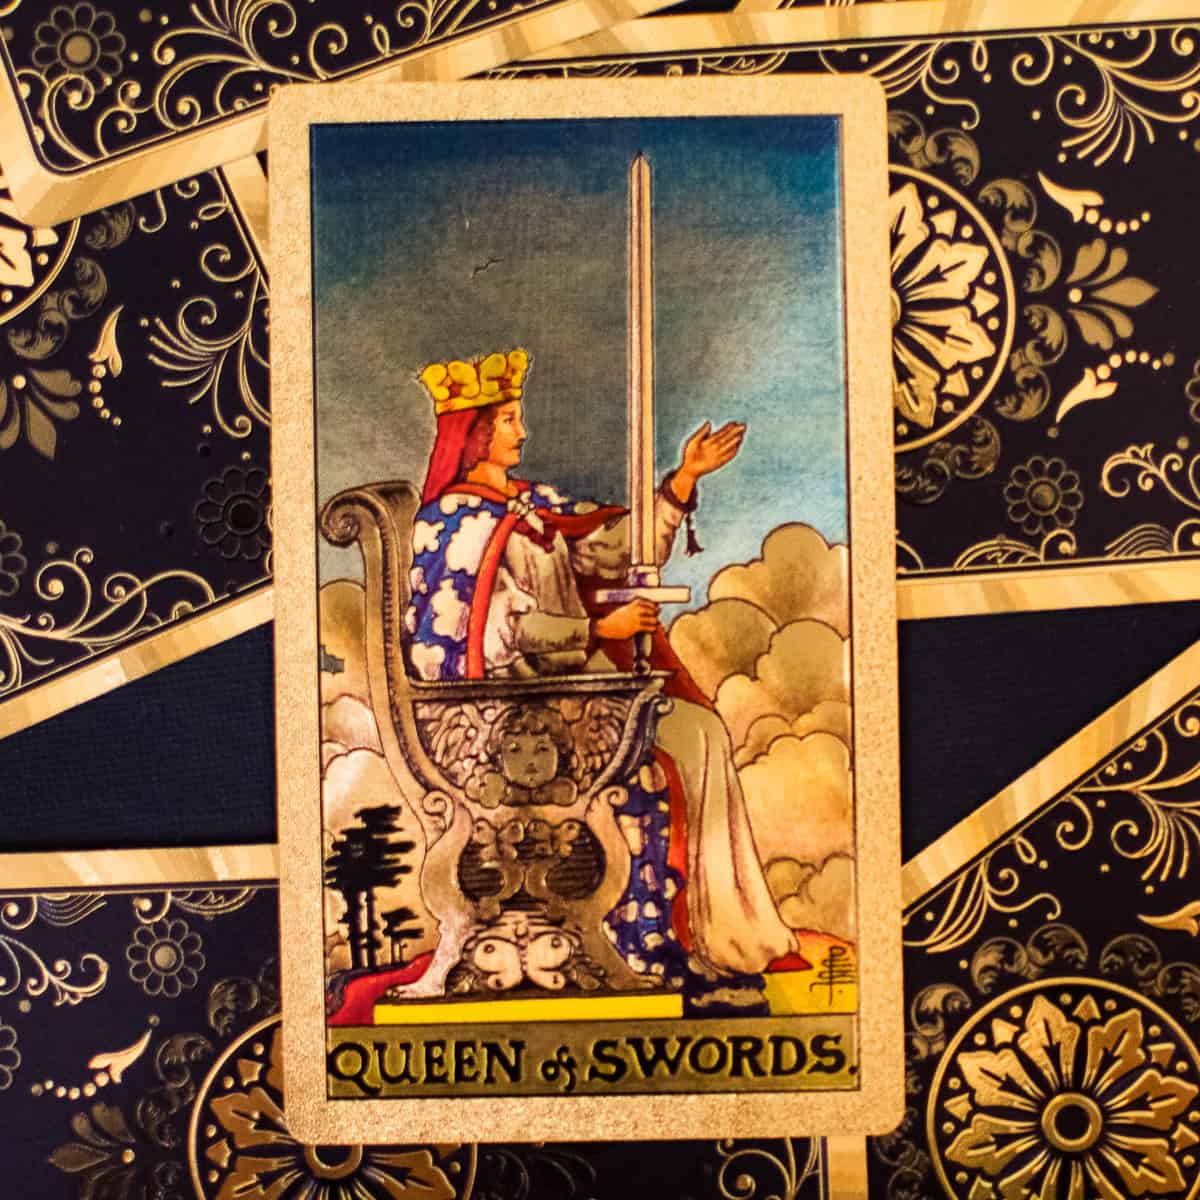 Queen on throne with a sword on a tarot card.